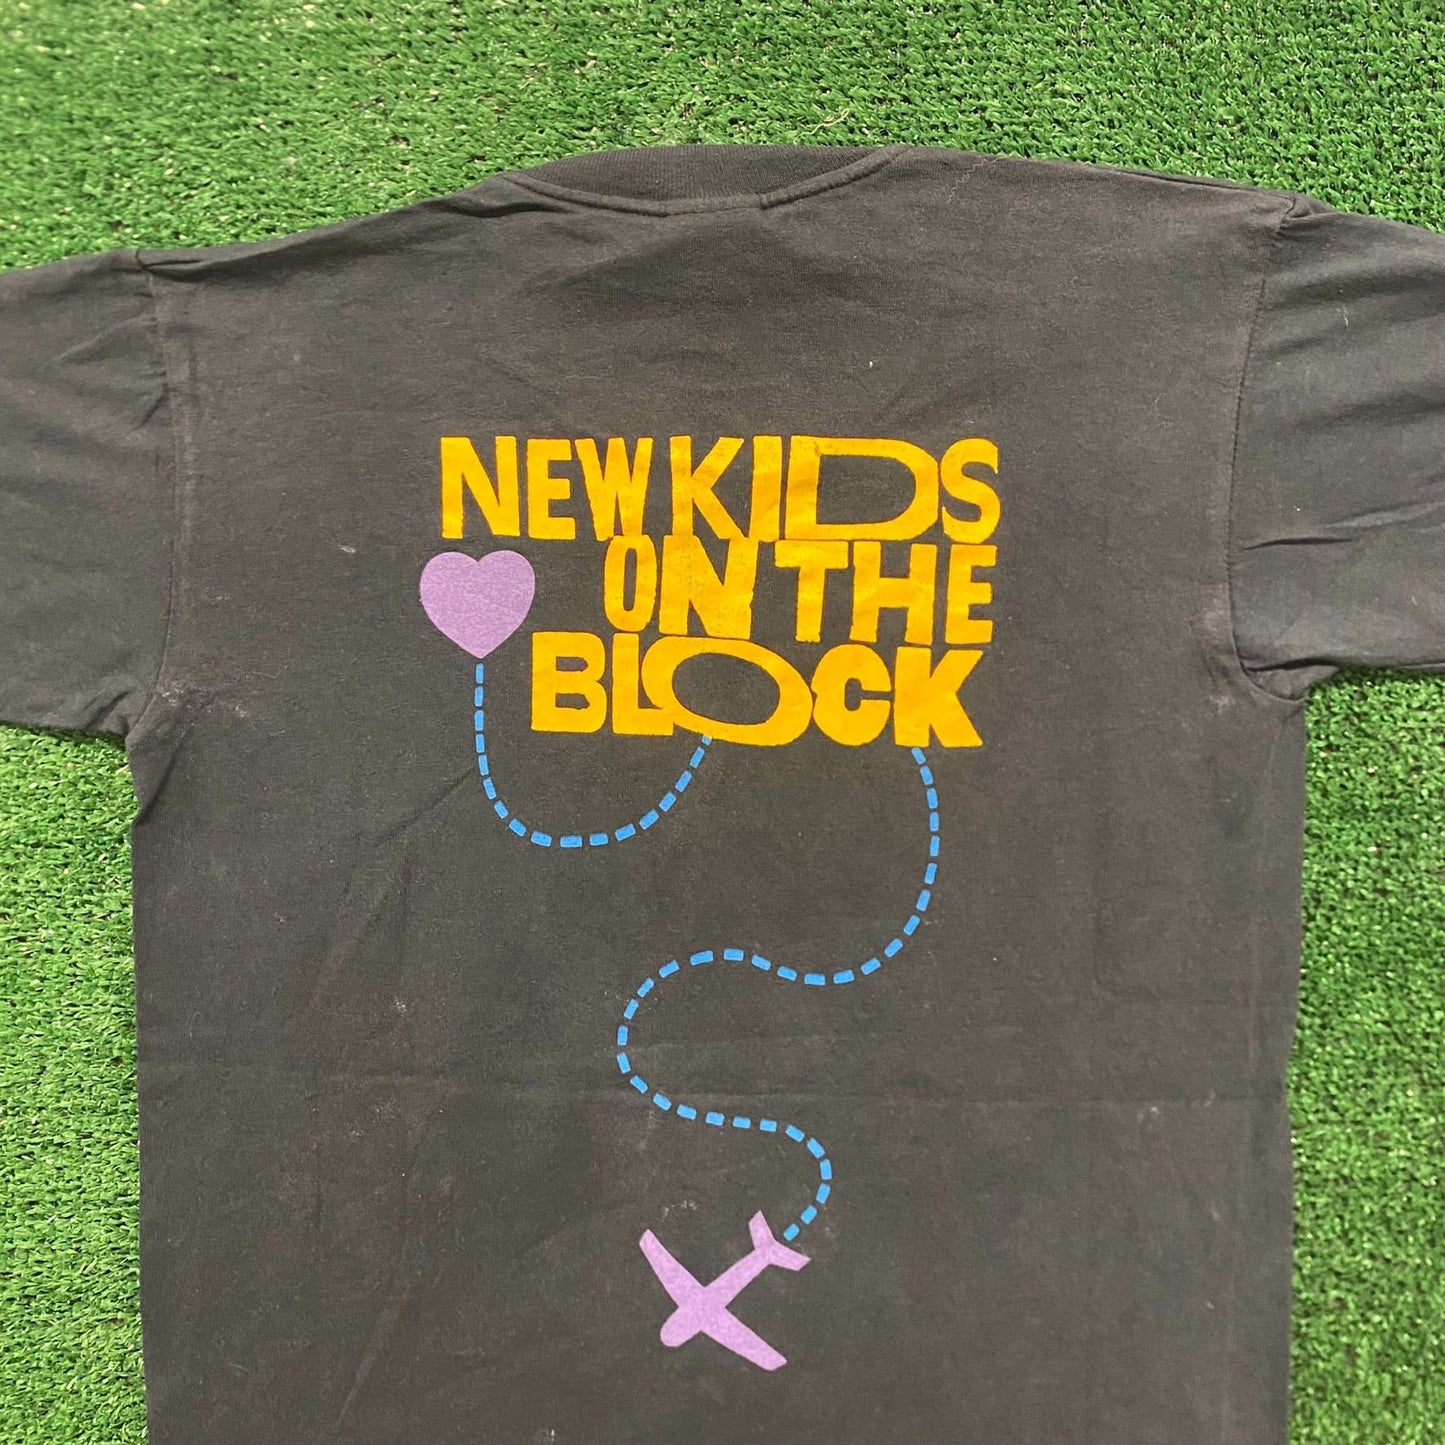 New Kids on the Block Vintage 90s Boy Band T-Shirt